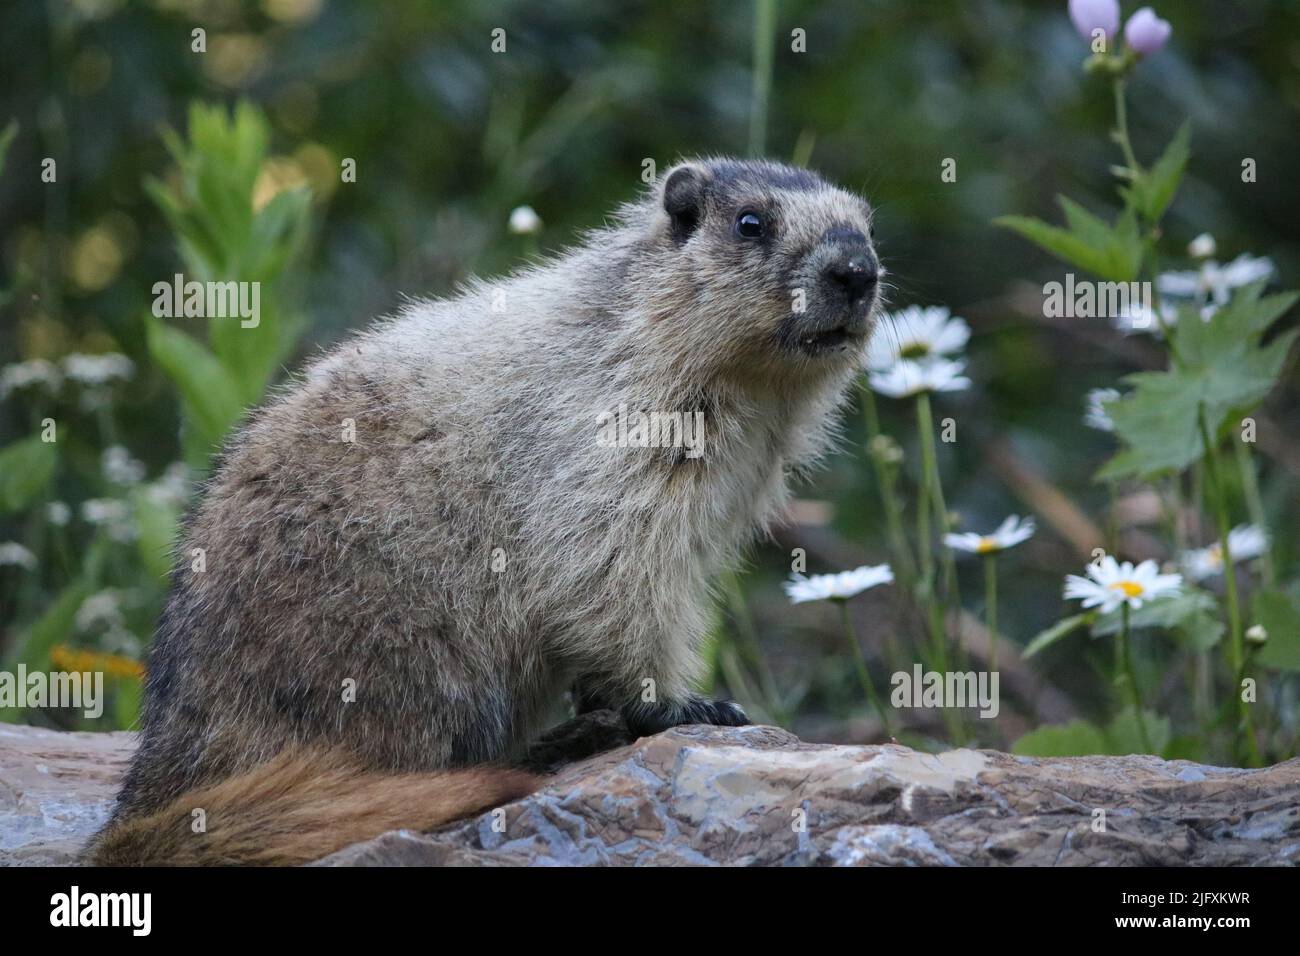 What have you been eating -Hoary marmot (Rodentia Sciuridae Marmota caligata)? Wash your face before perching on a rock wall posing by daisies! Stock Photo